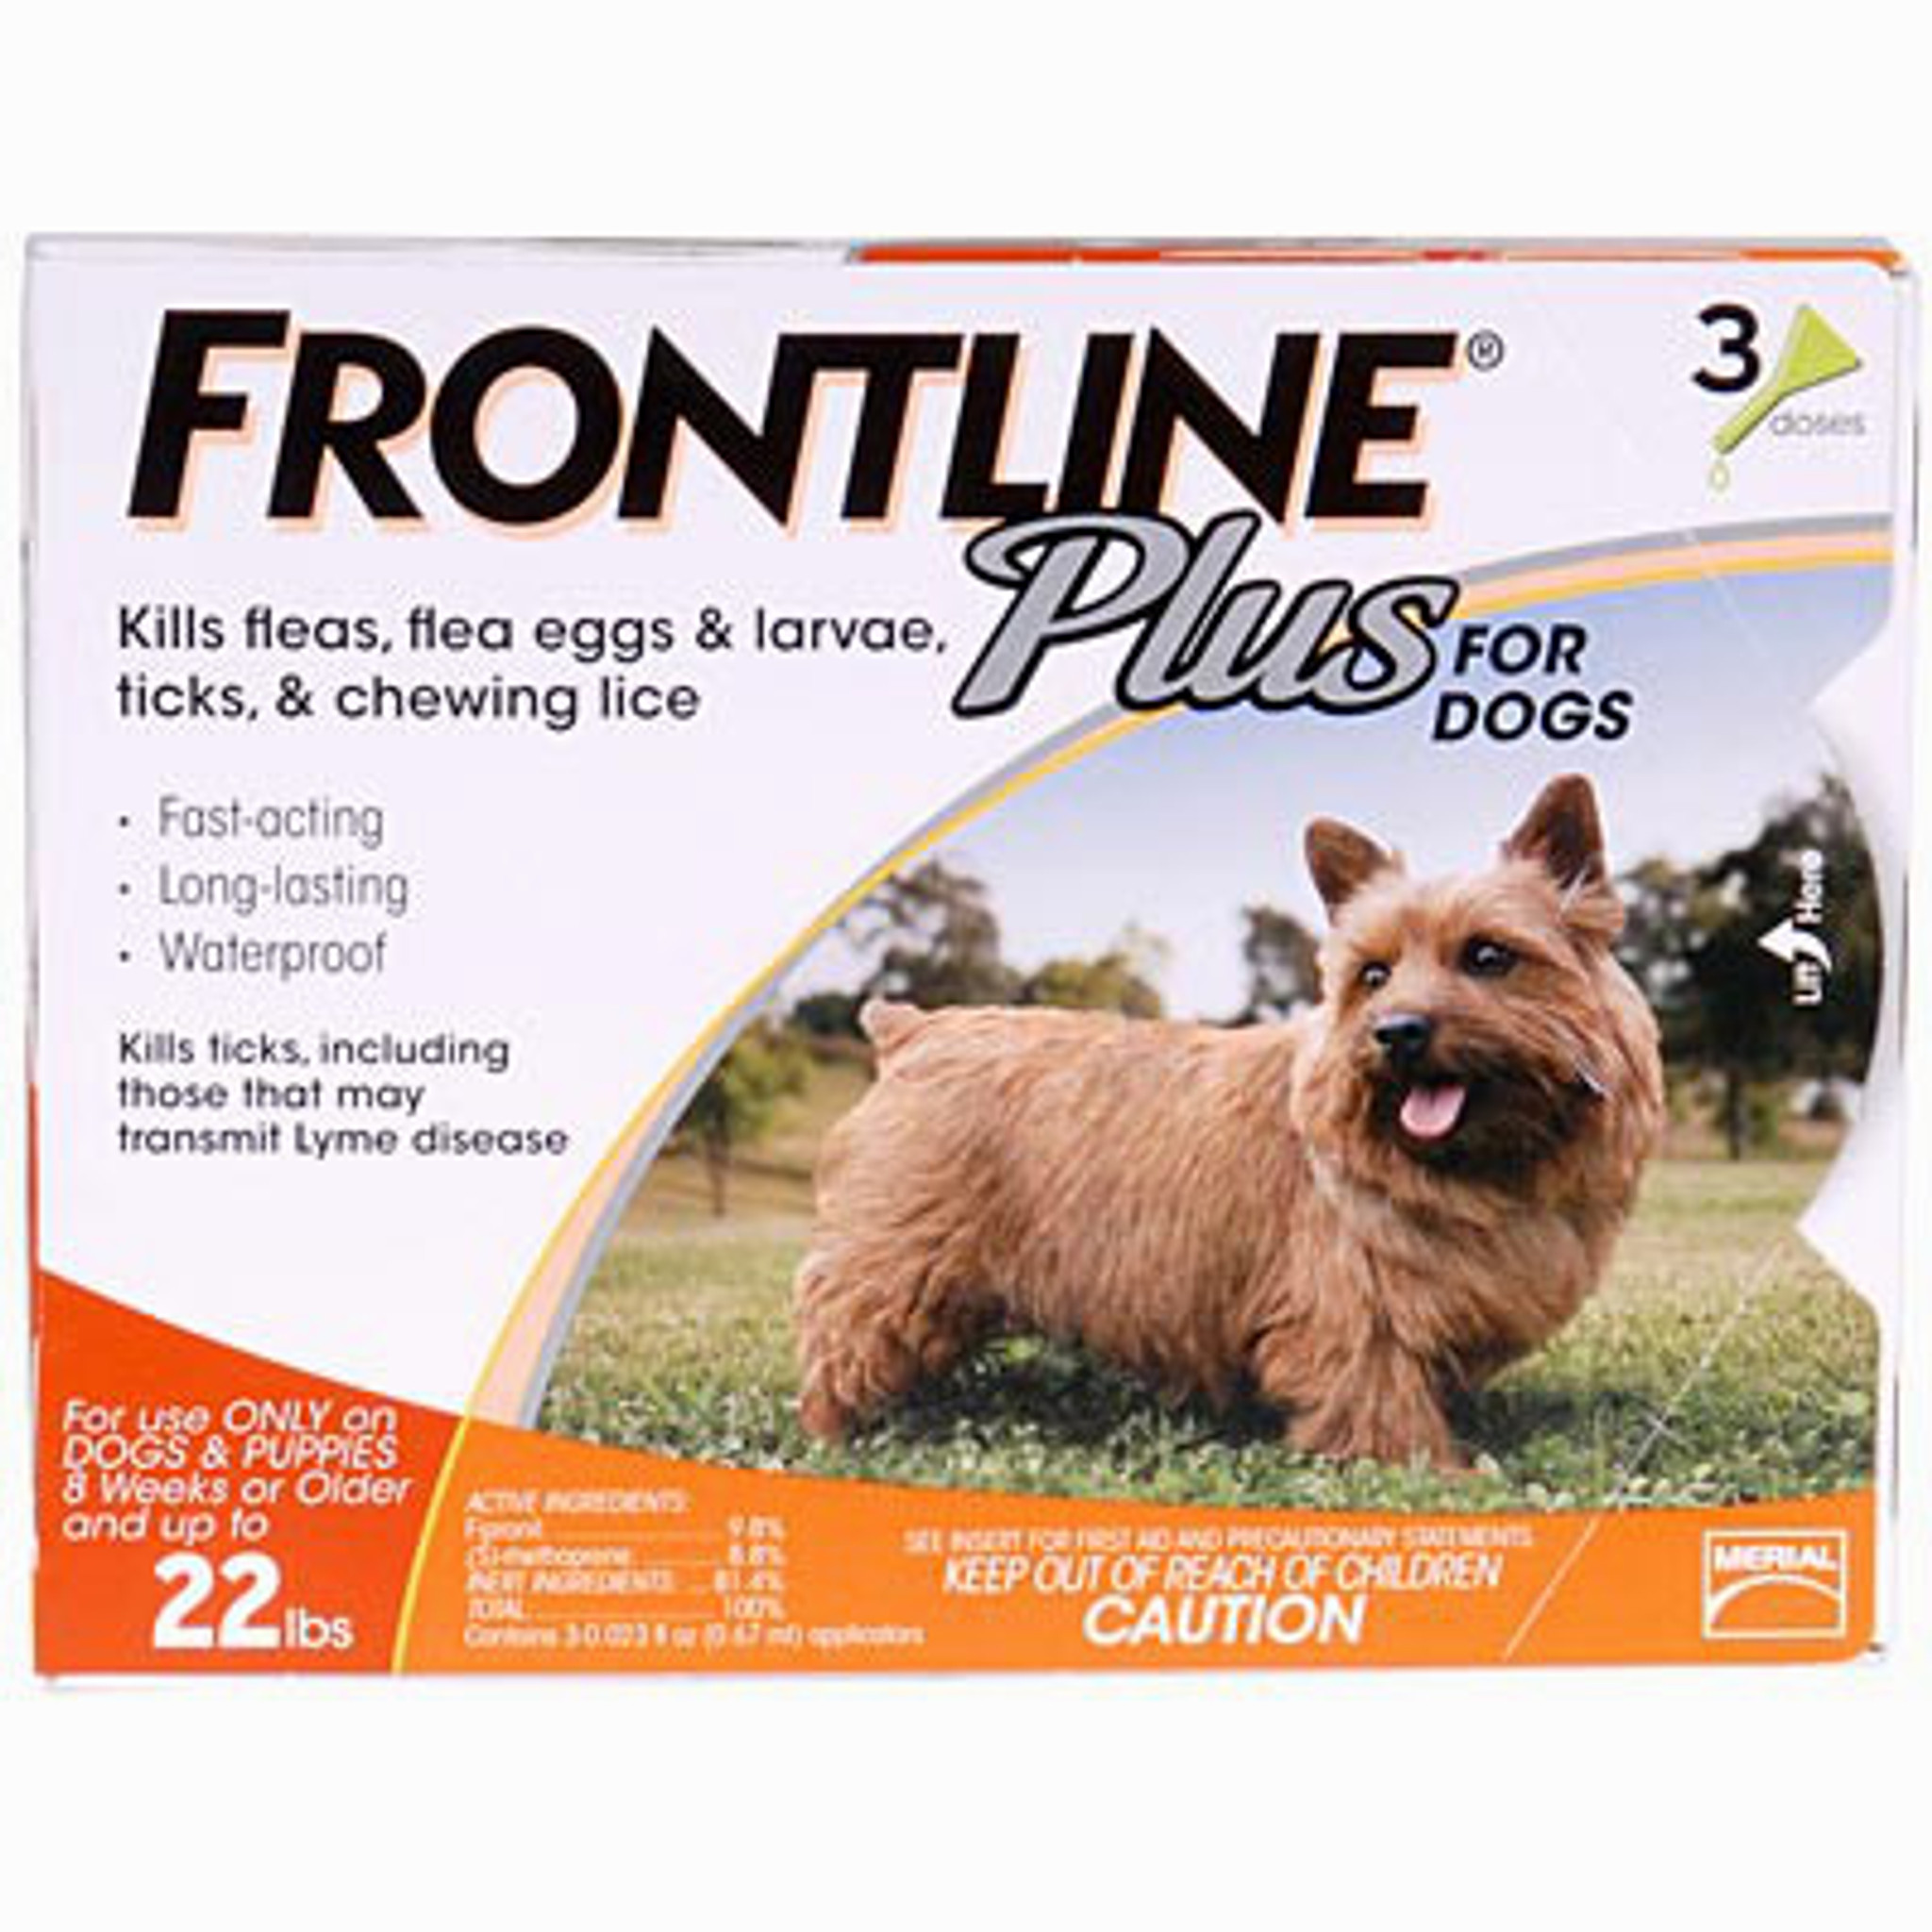 frontline-plus-for-dogs-up-to-22-lbs-up-to-10-kg-orange-3-doses